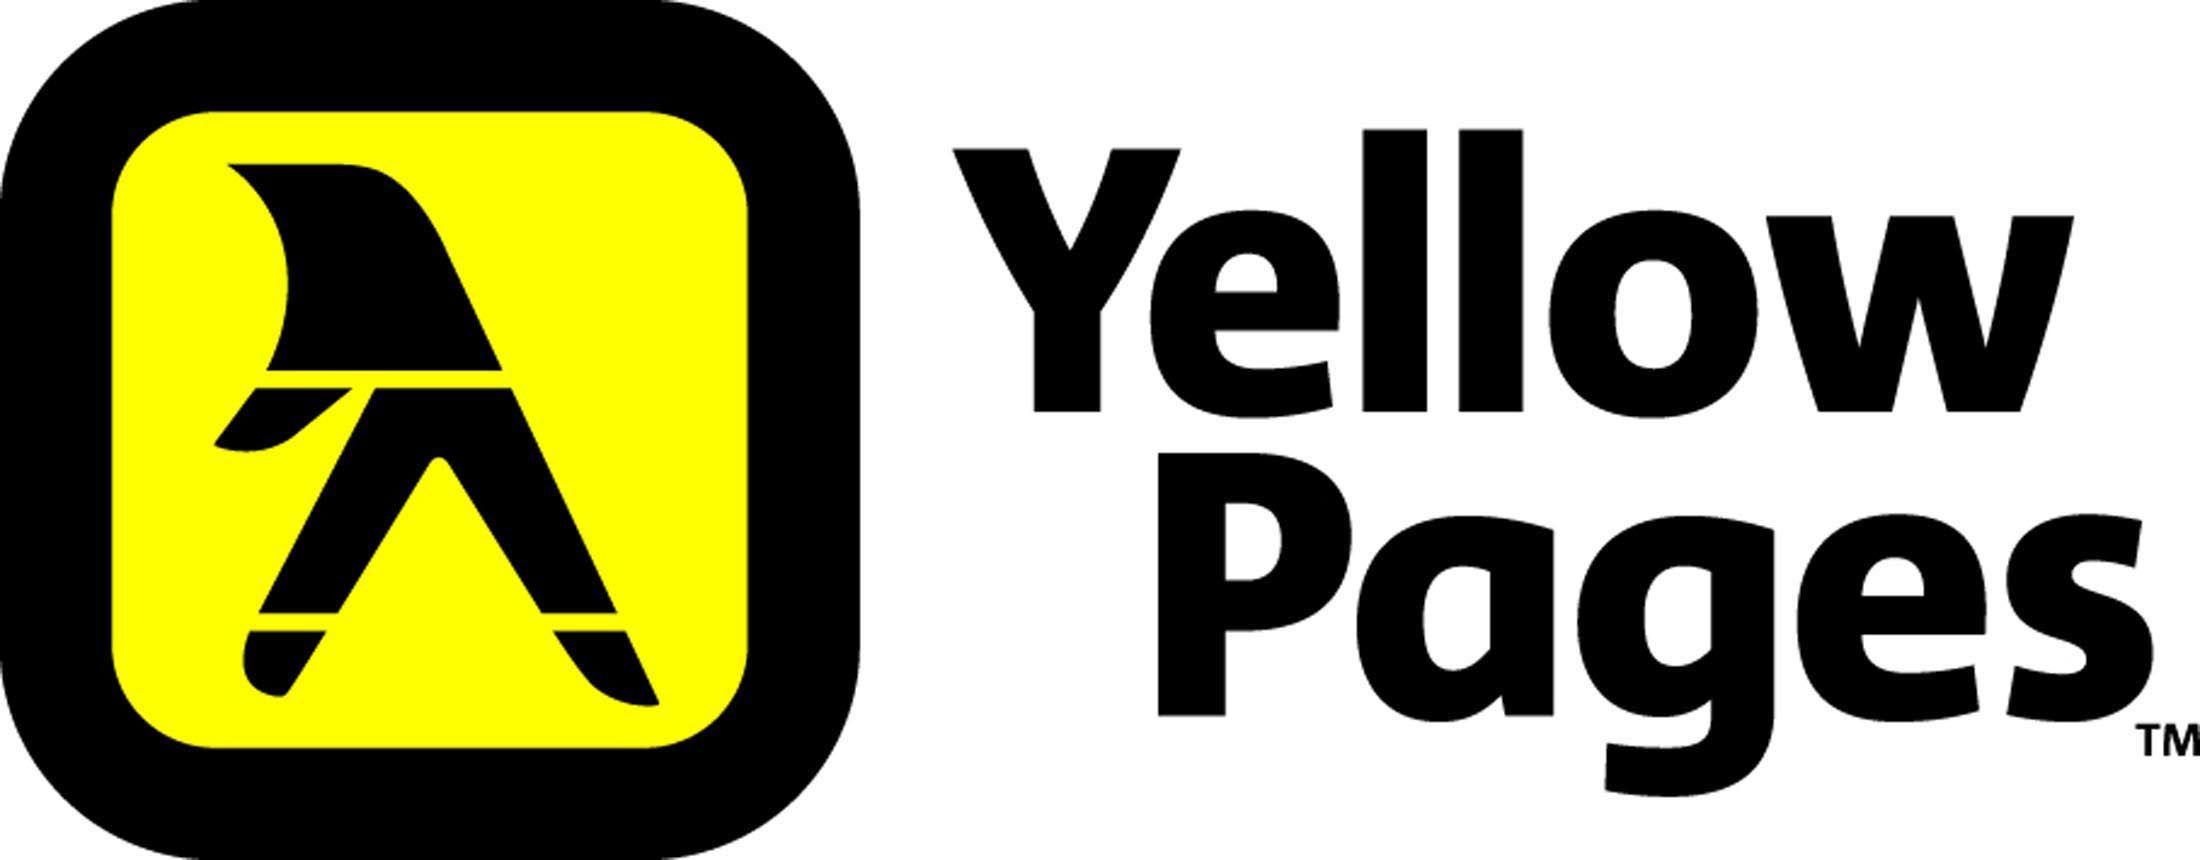 YP Yellow Pages Logo - 1. Visit yellowpages.com or yp.com 2. Search “PT Plus” and enter